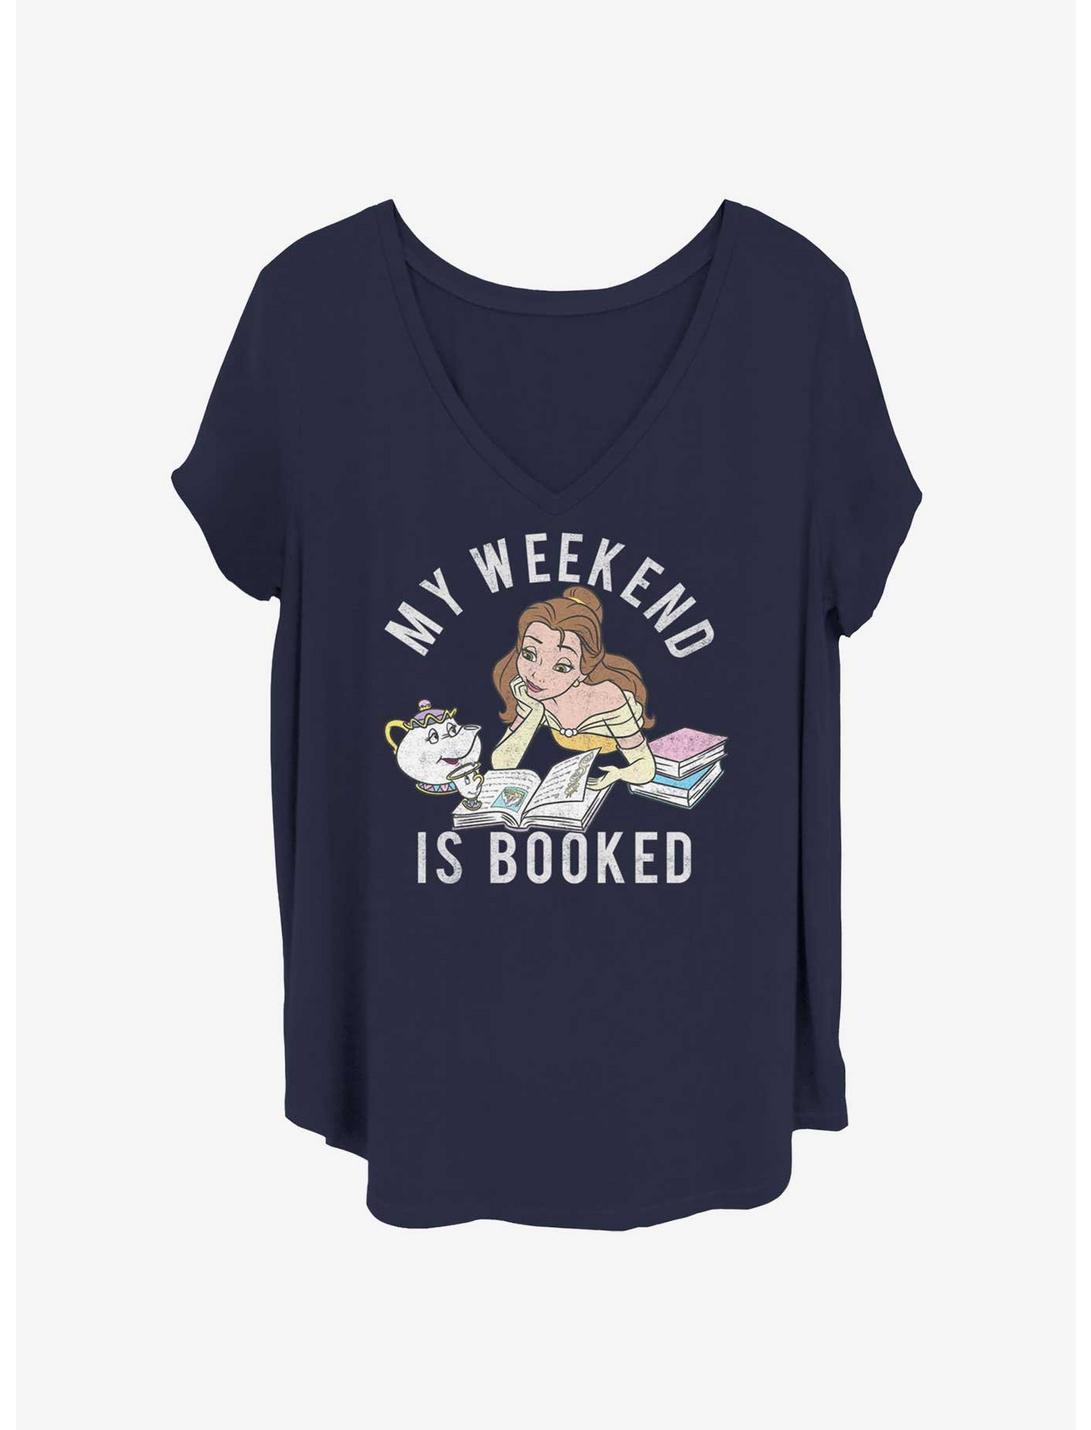 Disney Beauty and the Beast Weekend Booked Girls T-Shirt Plus Size, NAVY, hi-res